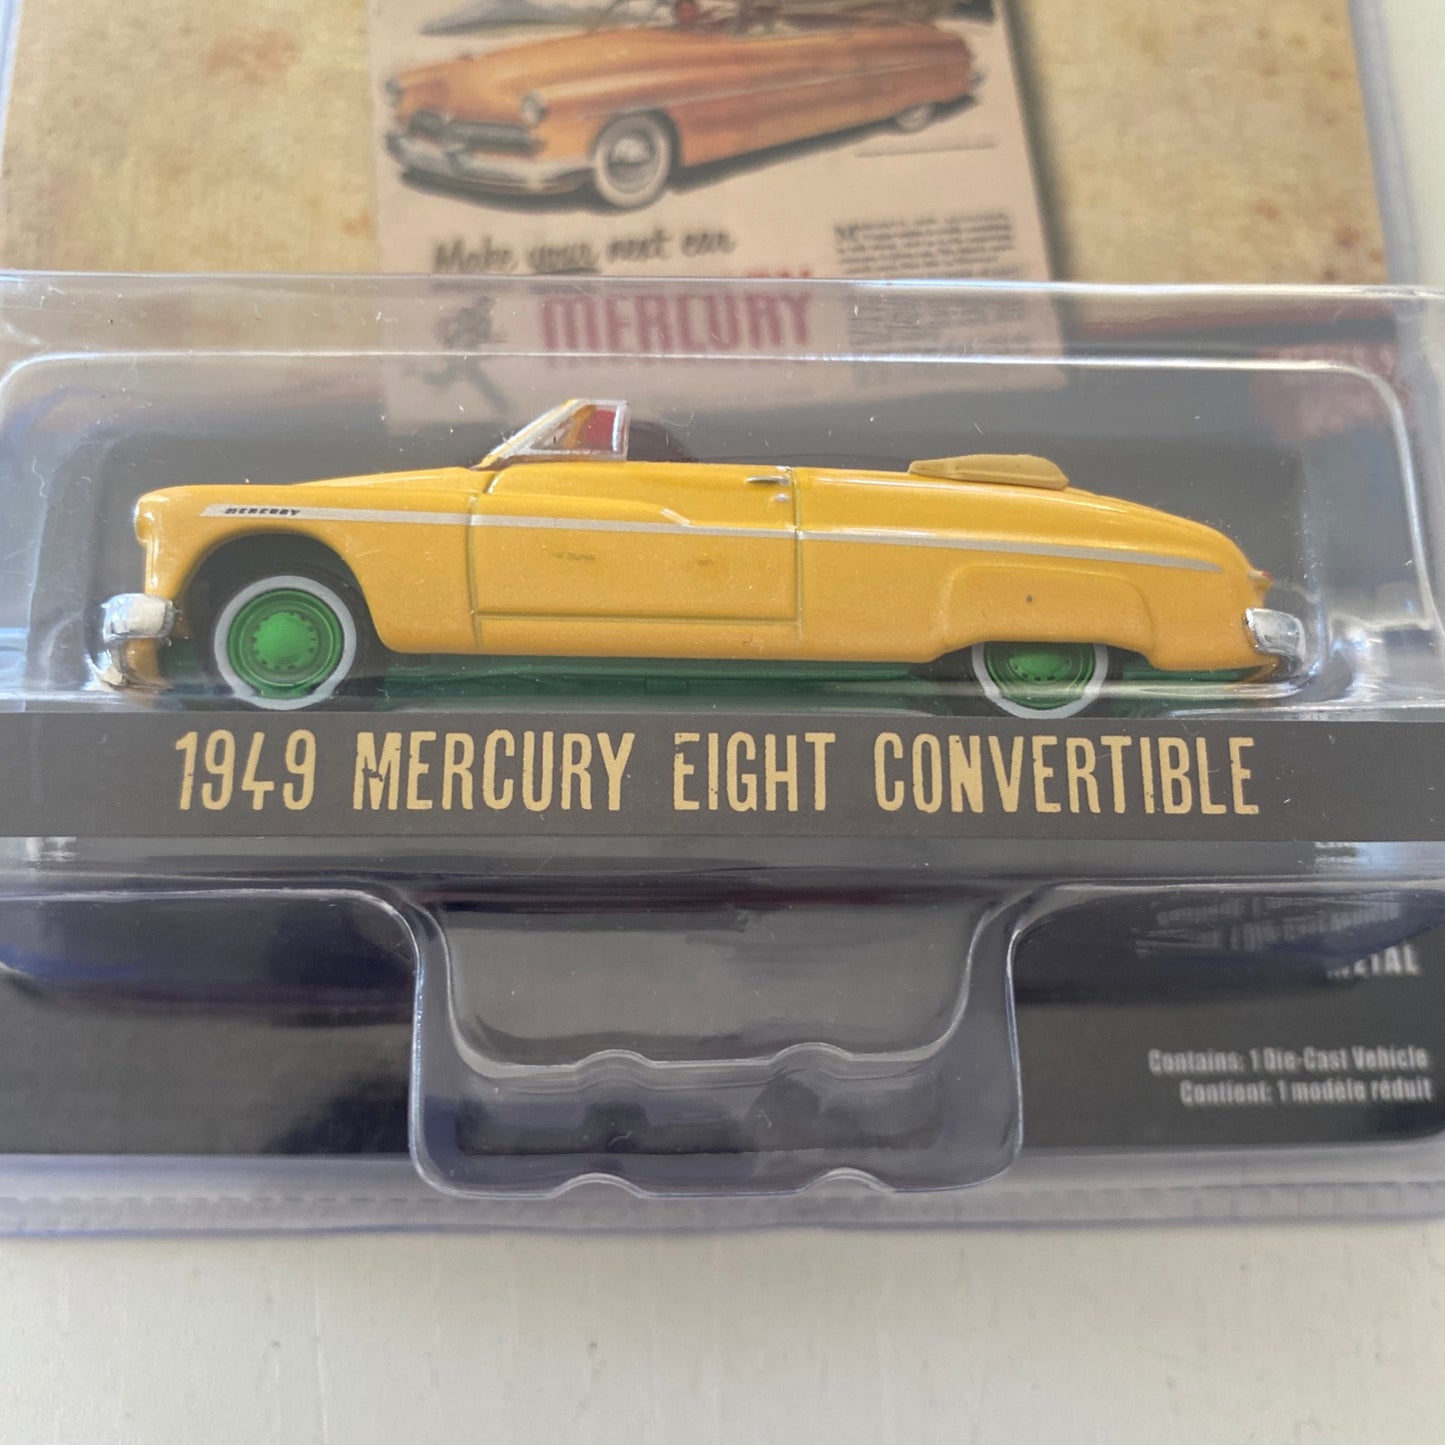 GREENLIGHT - 1949 Mercury Eight Convertible (Chase -Vintage Ad Cars S9) J95